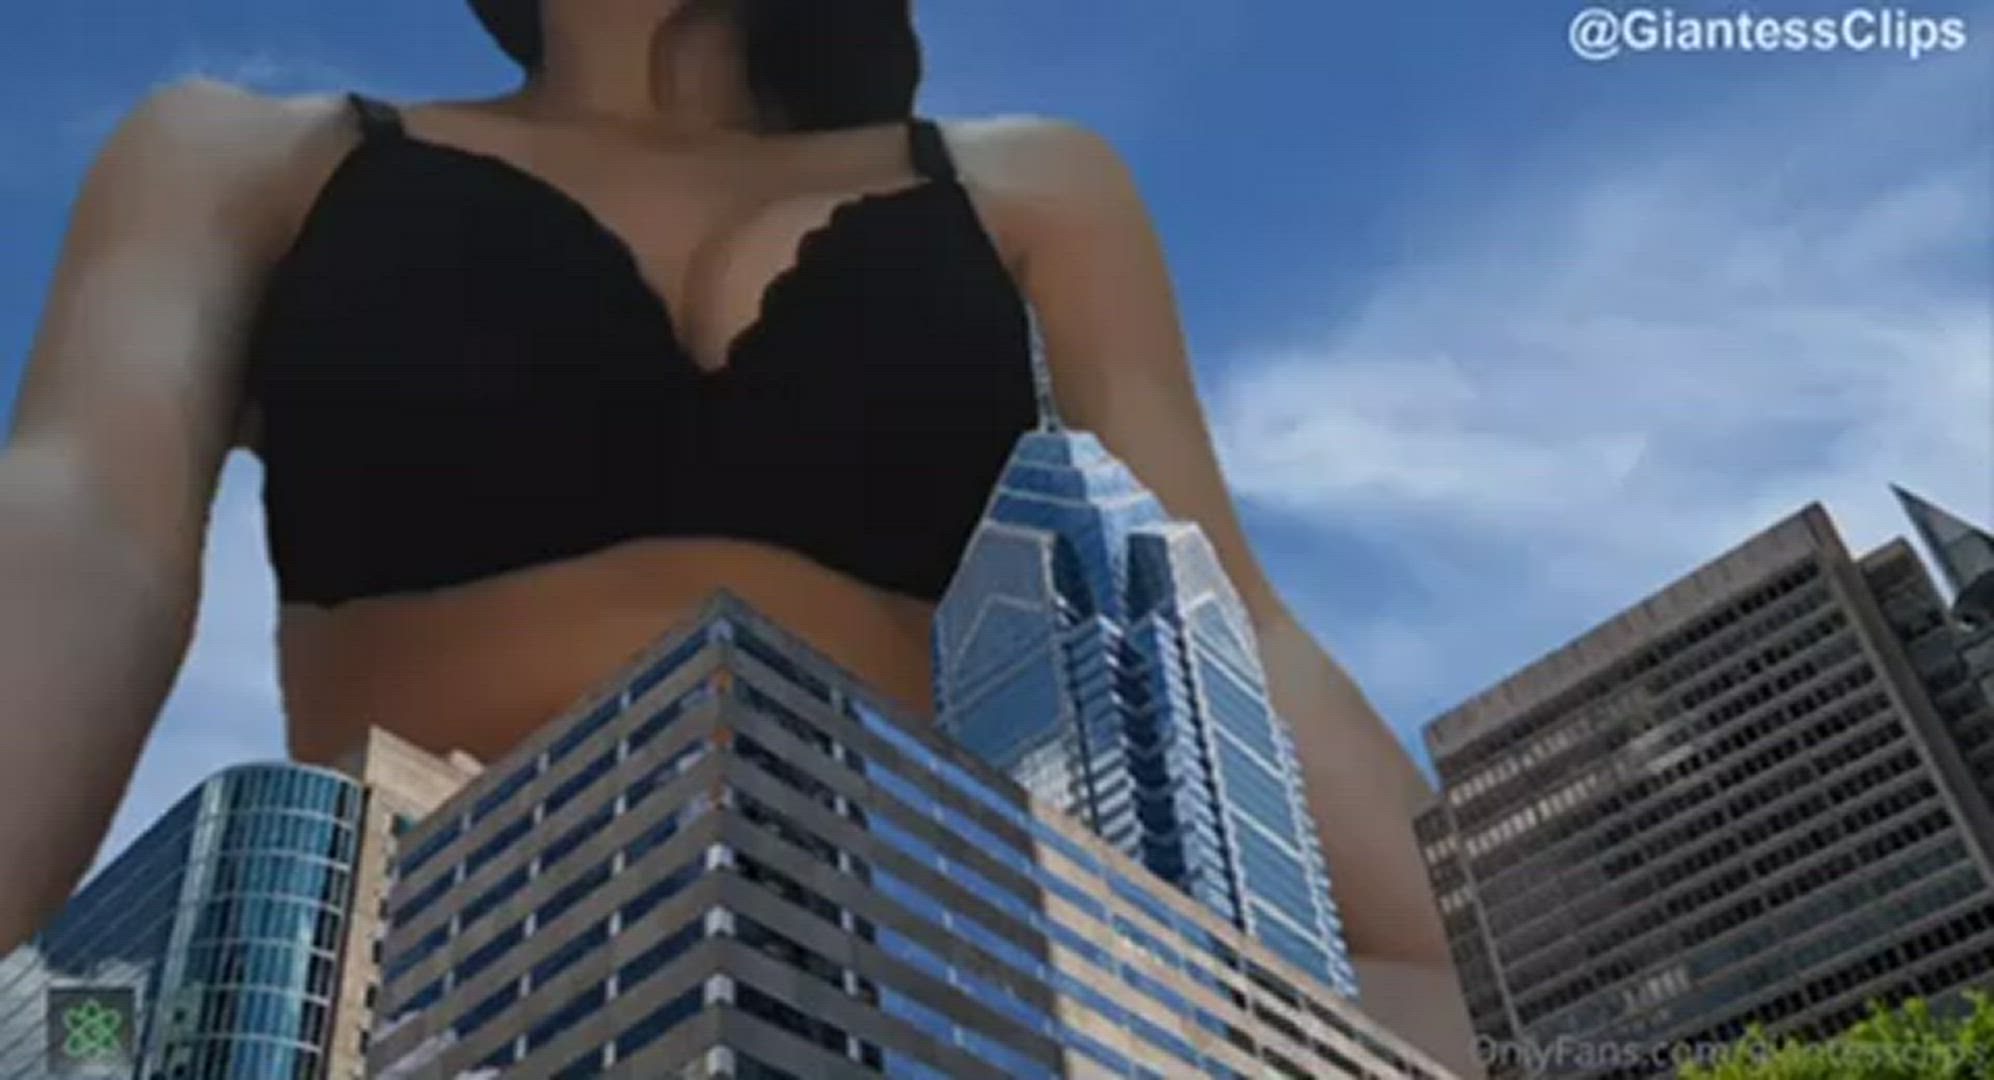 Giantess porn video with onlyfans model Larger Than Life Giantess <strong>@giantessclips</strong>